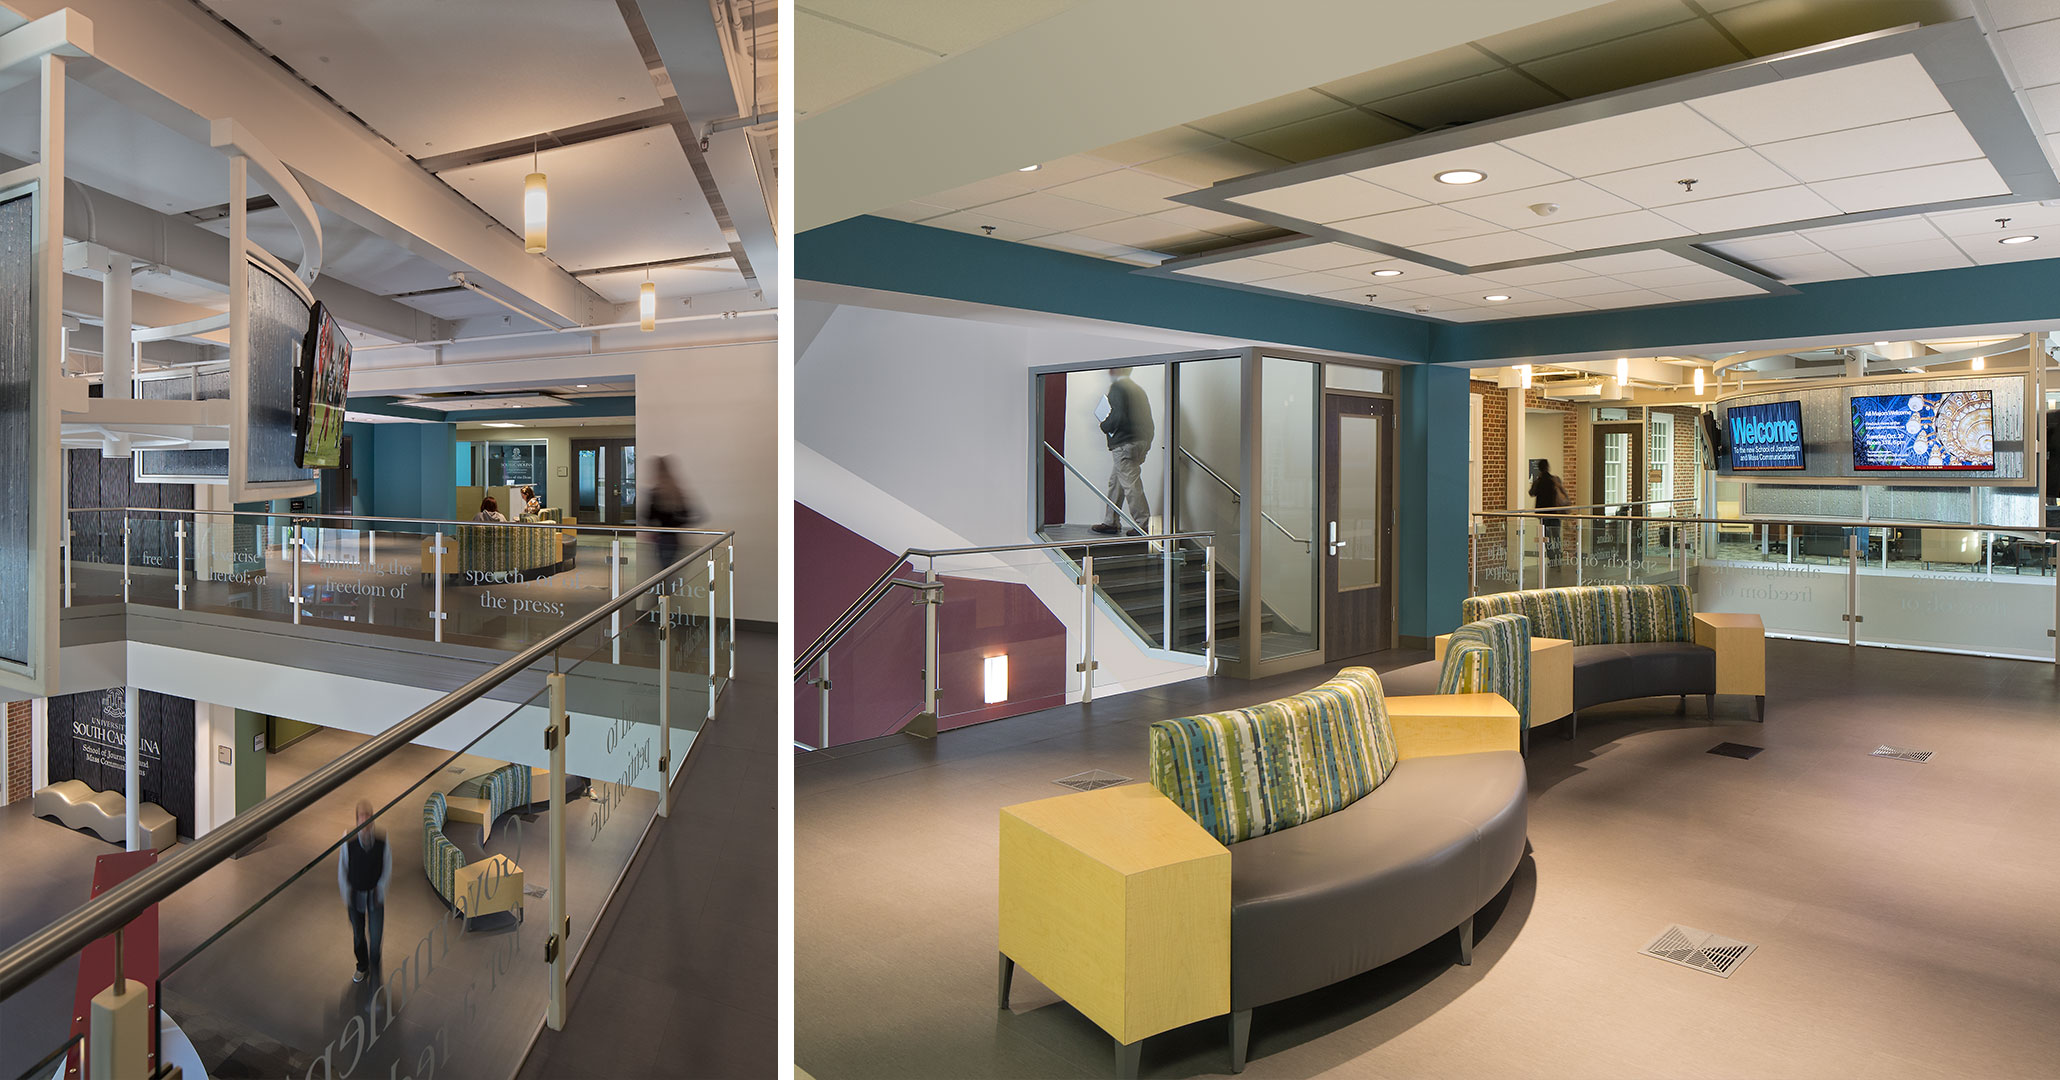 UofSC worked with Boudreaux architects to improve the interior spaces for students at the School of Journalism.